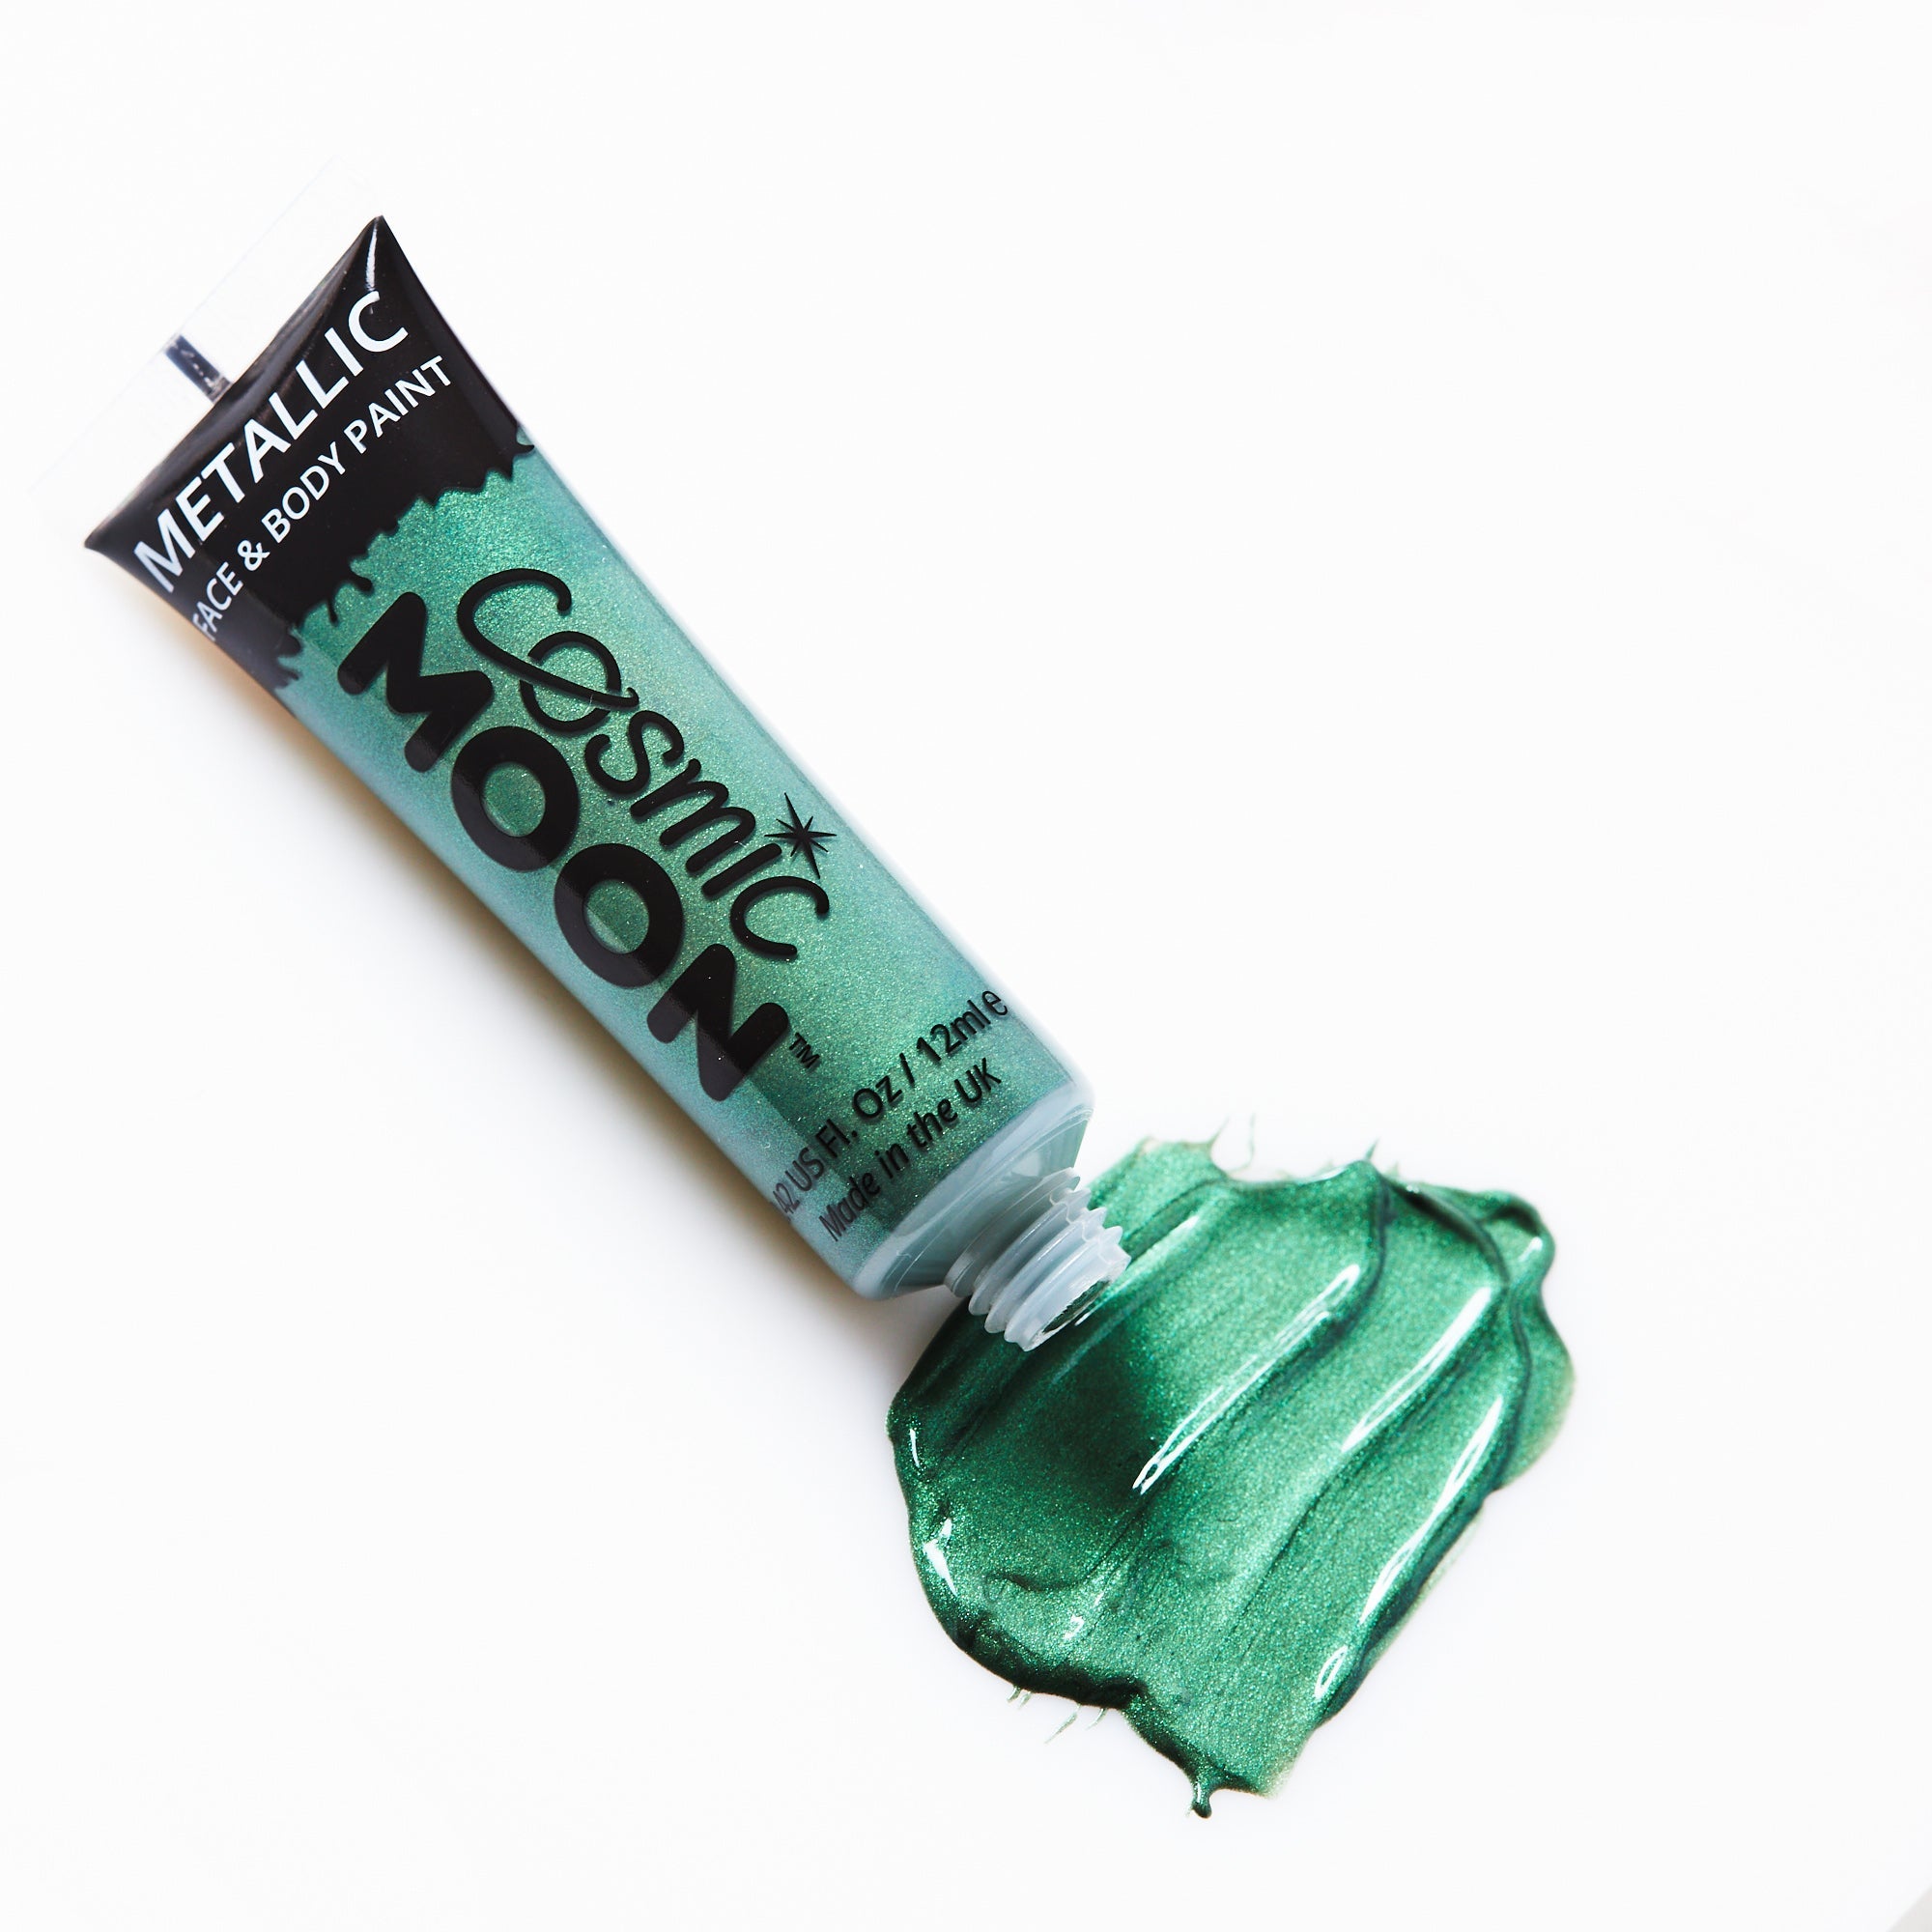 Green - Metallic Face & Body Paint Makeup. Cosmetically certified, FDA & Health Canada compliant, cruelty free and vegan.